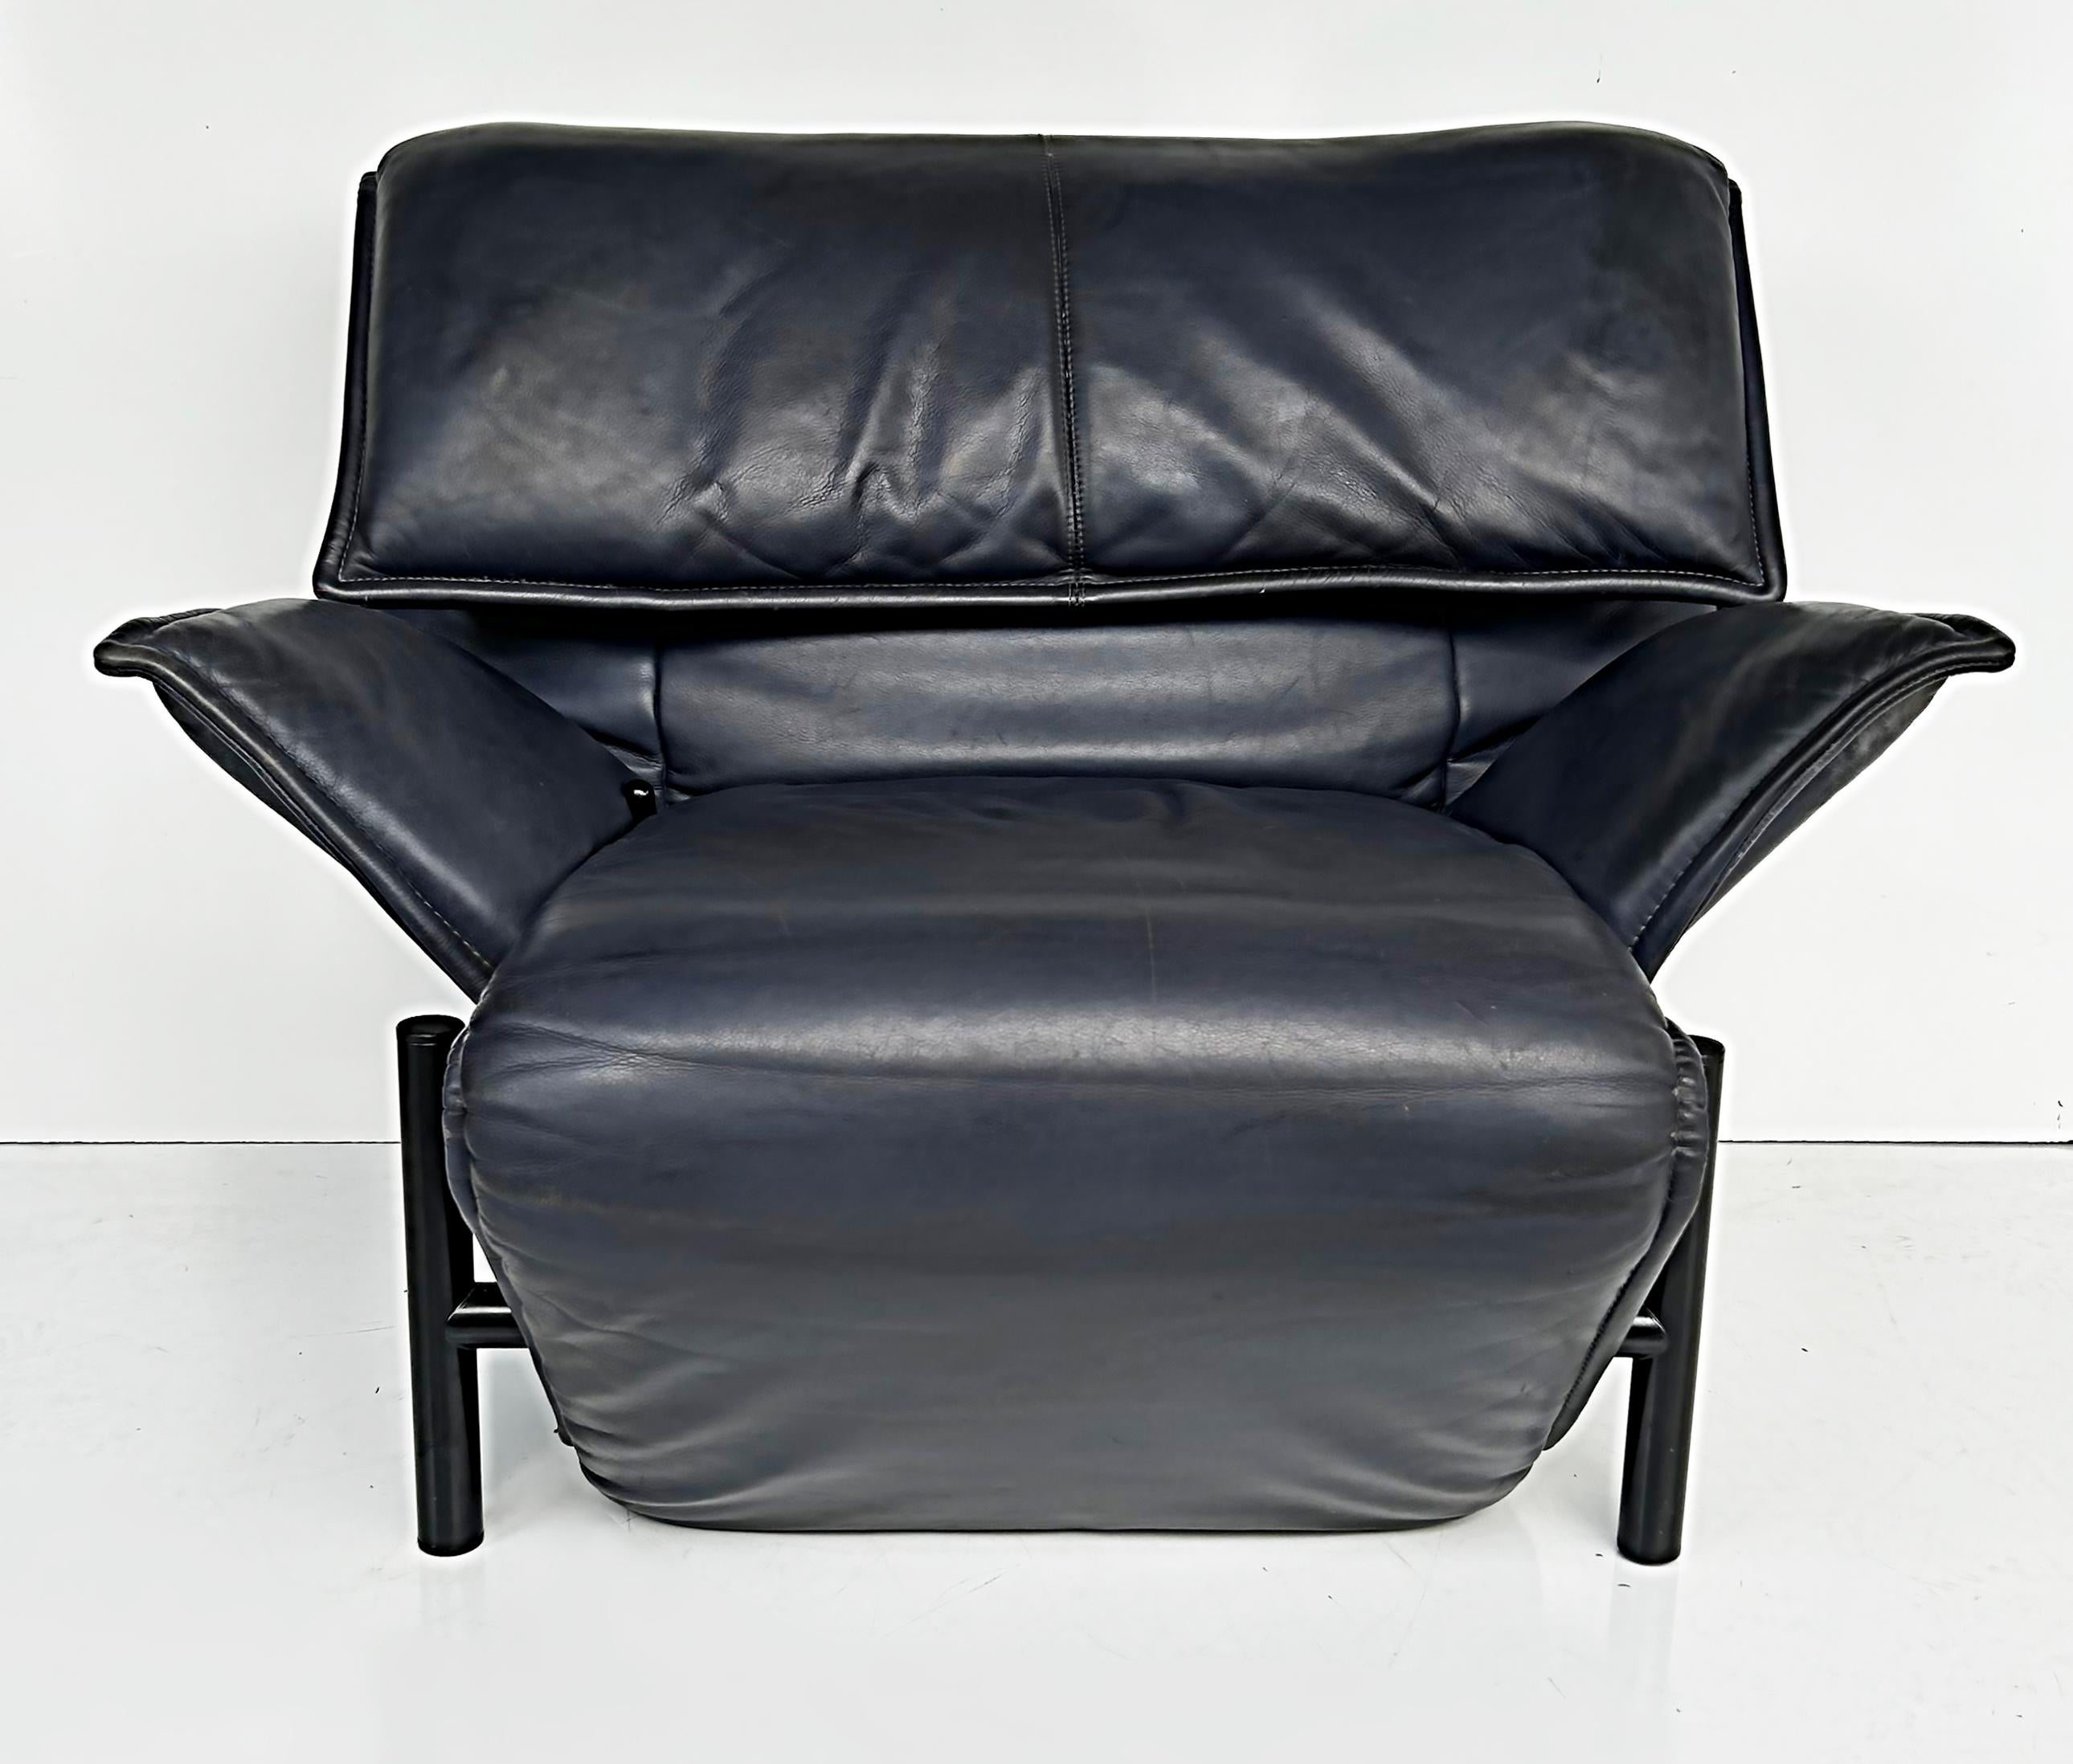 Vico Magistretti Cassina Italy Leather Chaise Lounge Chairs, 